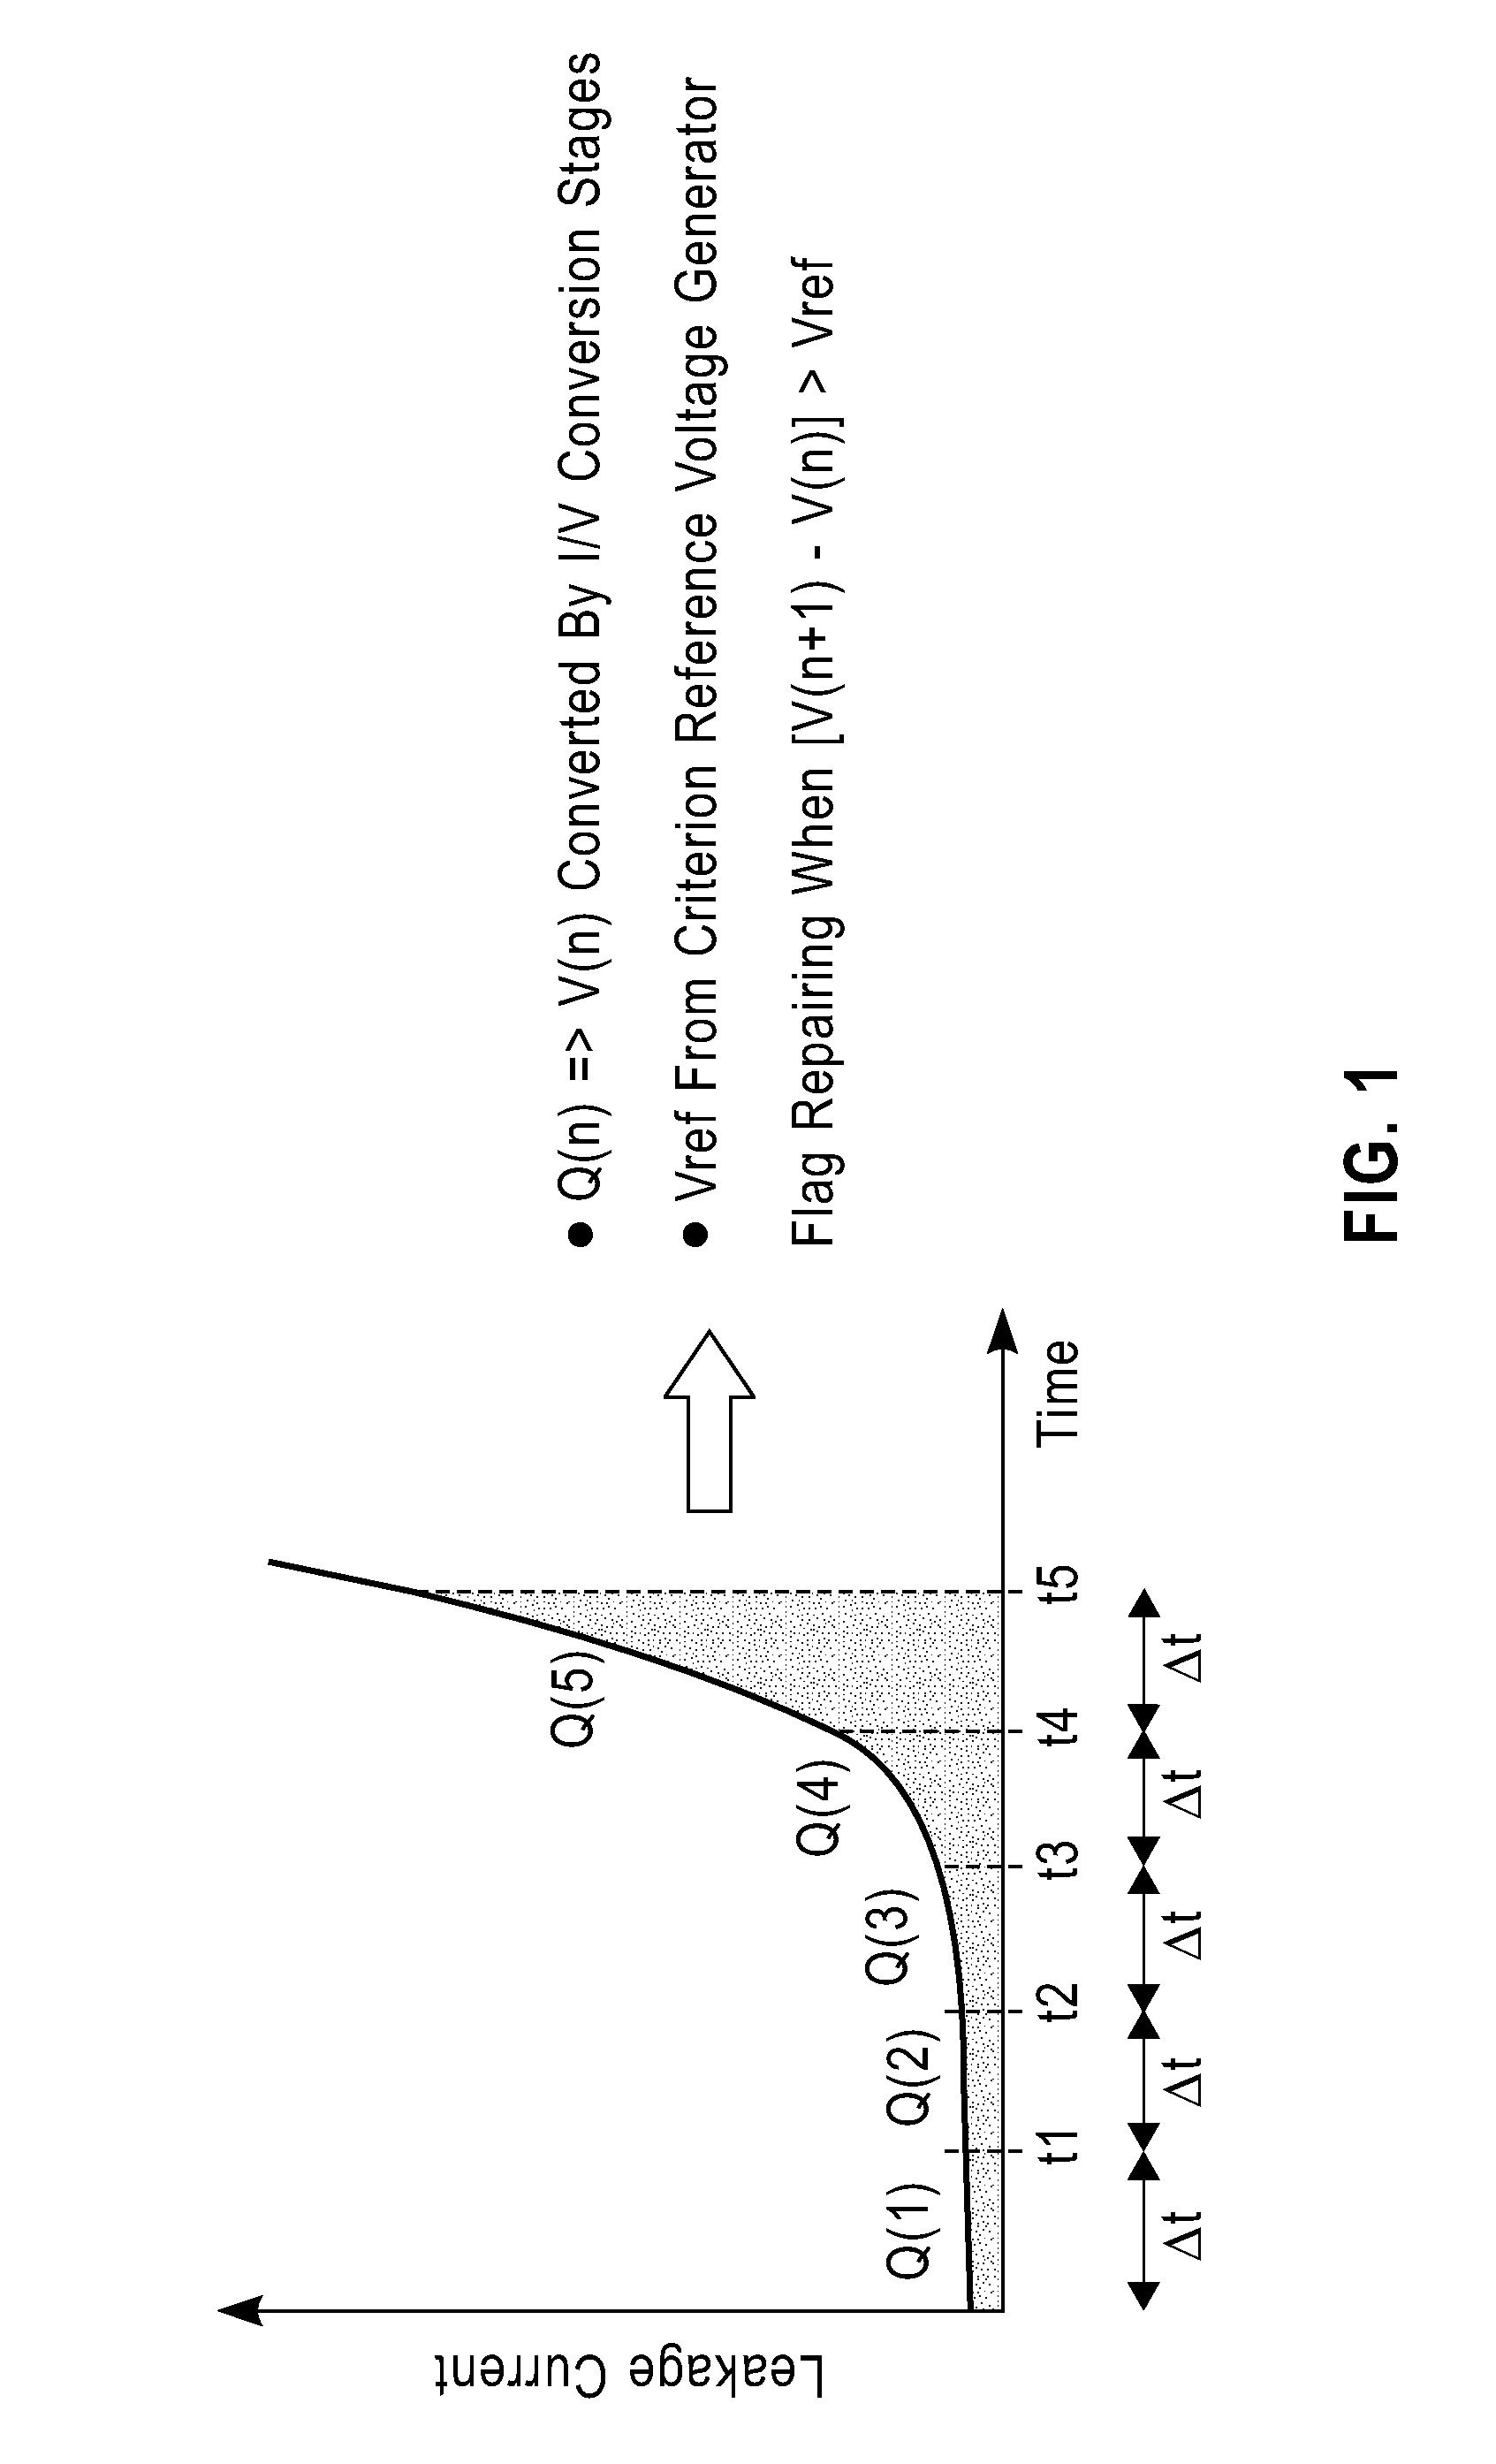 Leakage current mitigation in a semiconductor device